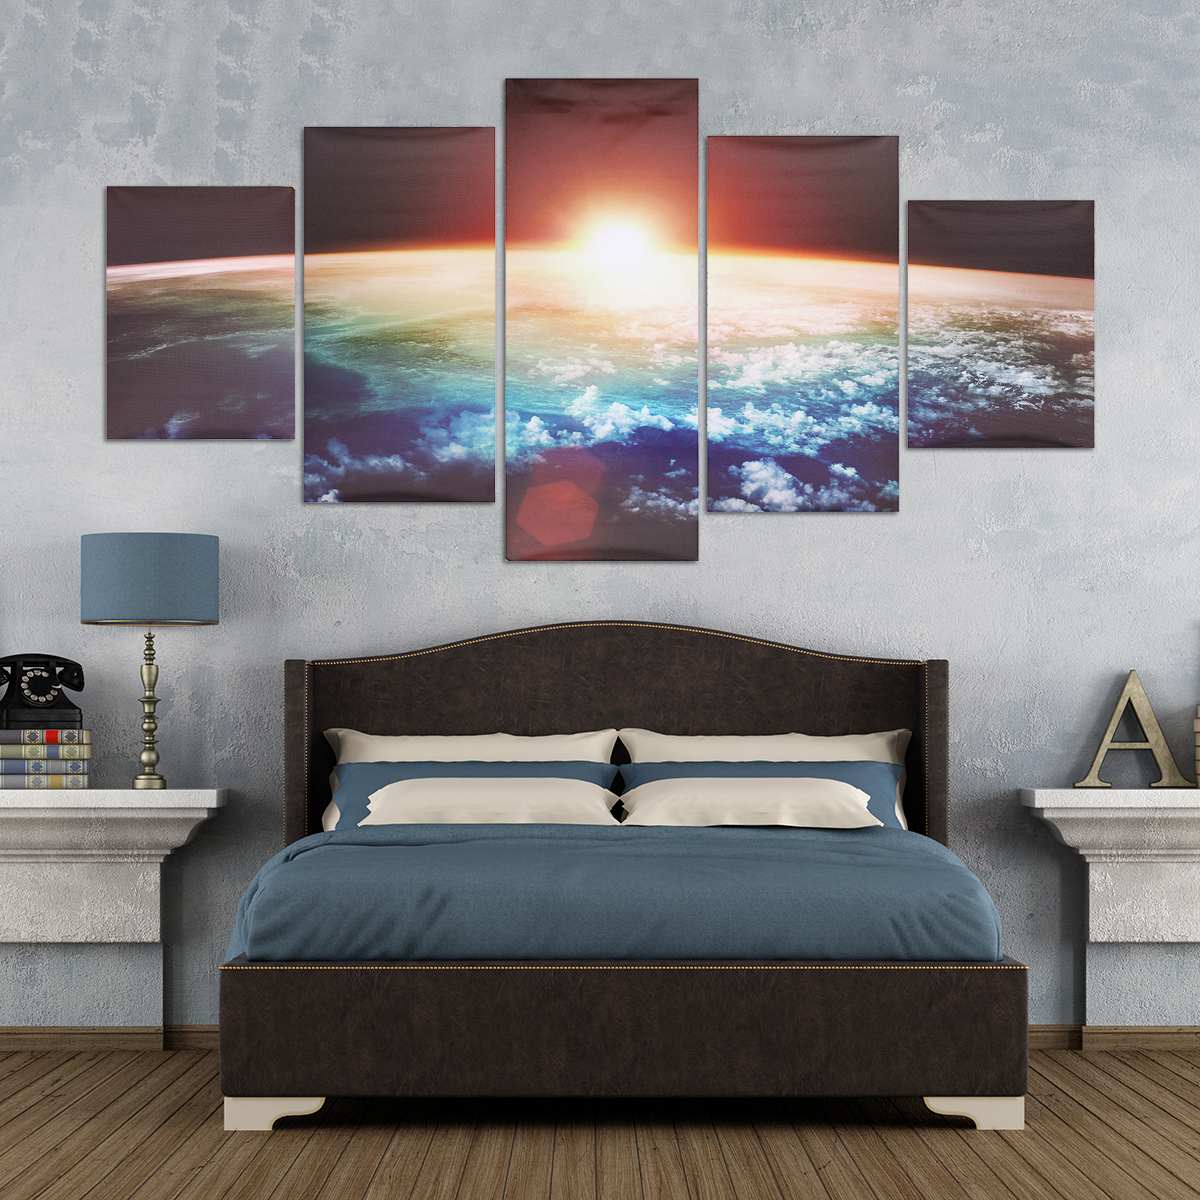 

5 Cascade Sunrise Earth Canvas Wall Painting Picture Home Decoration No Framed